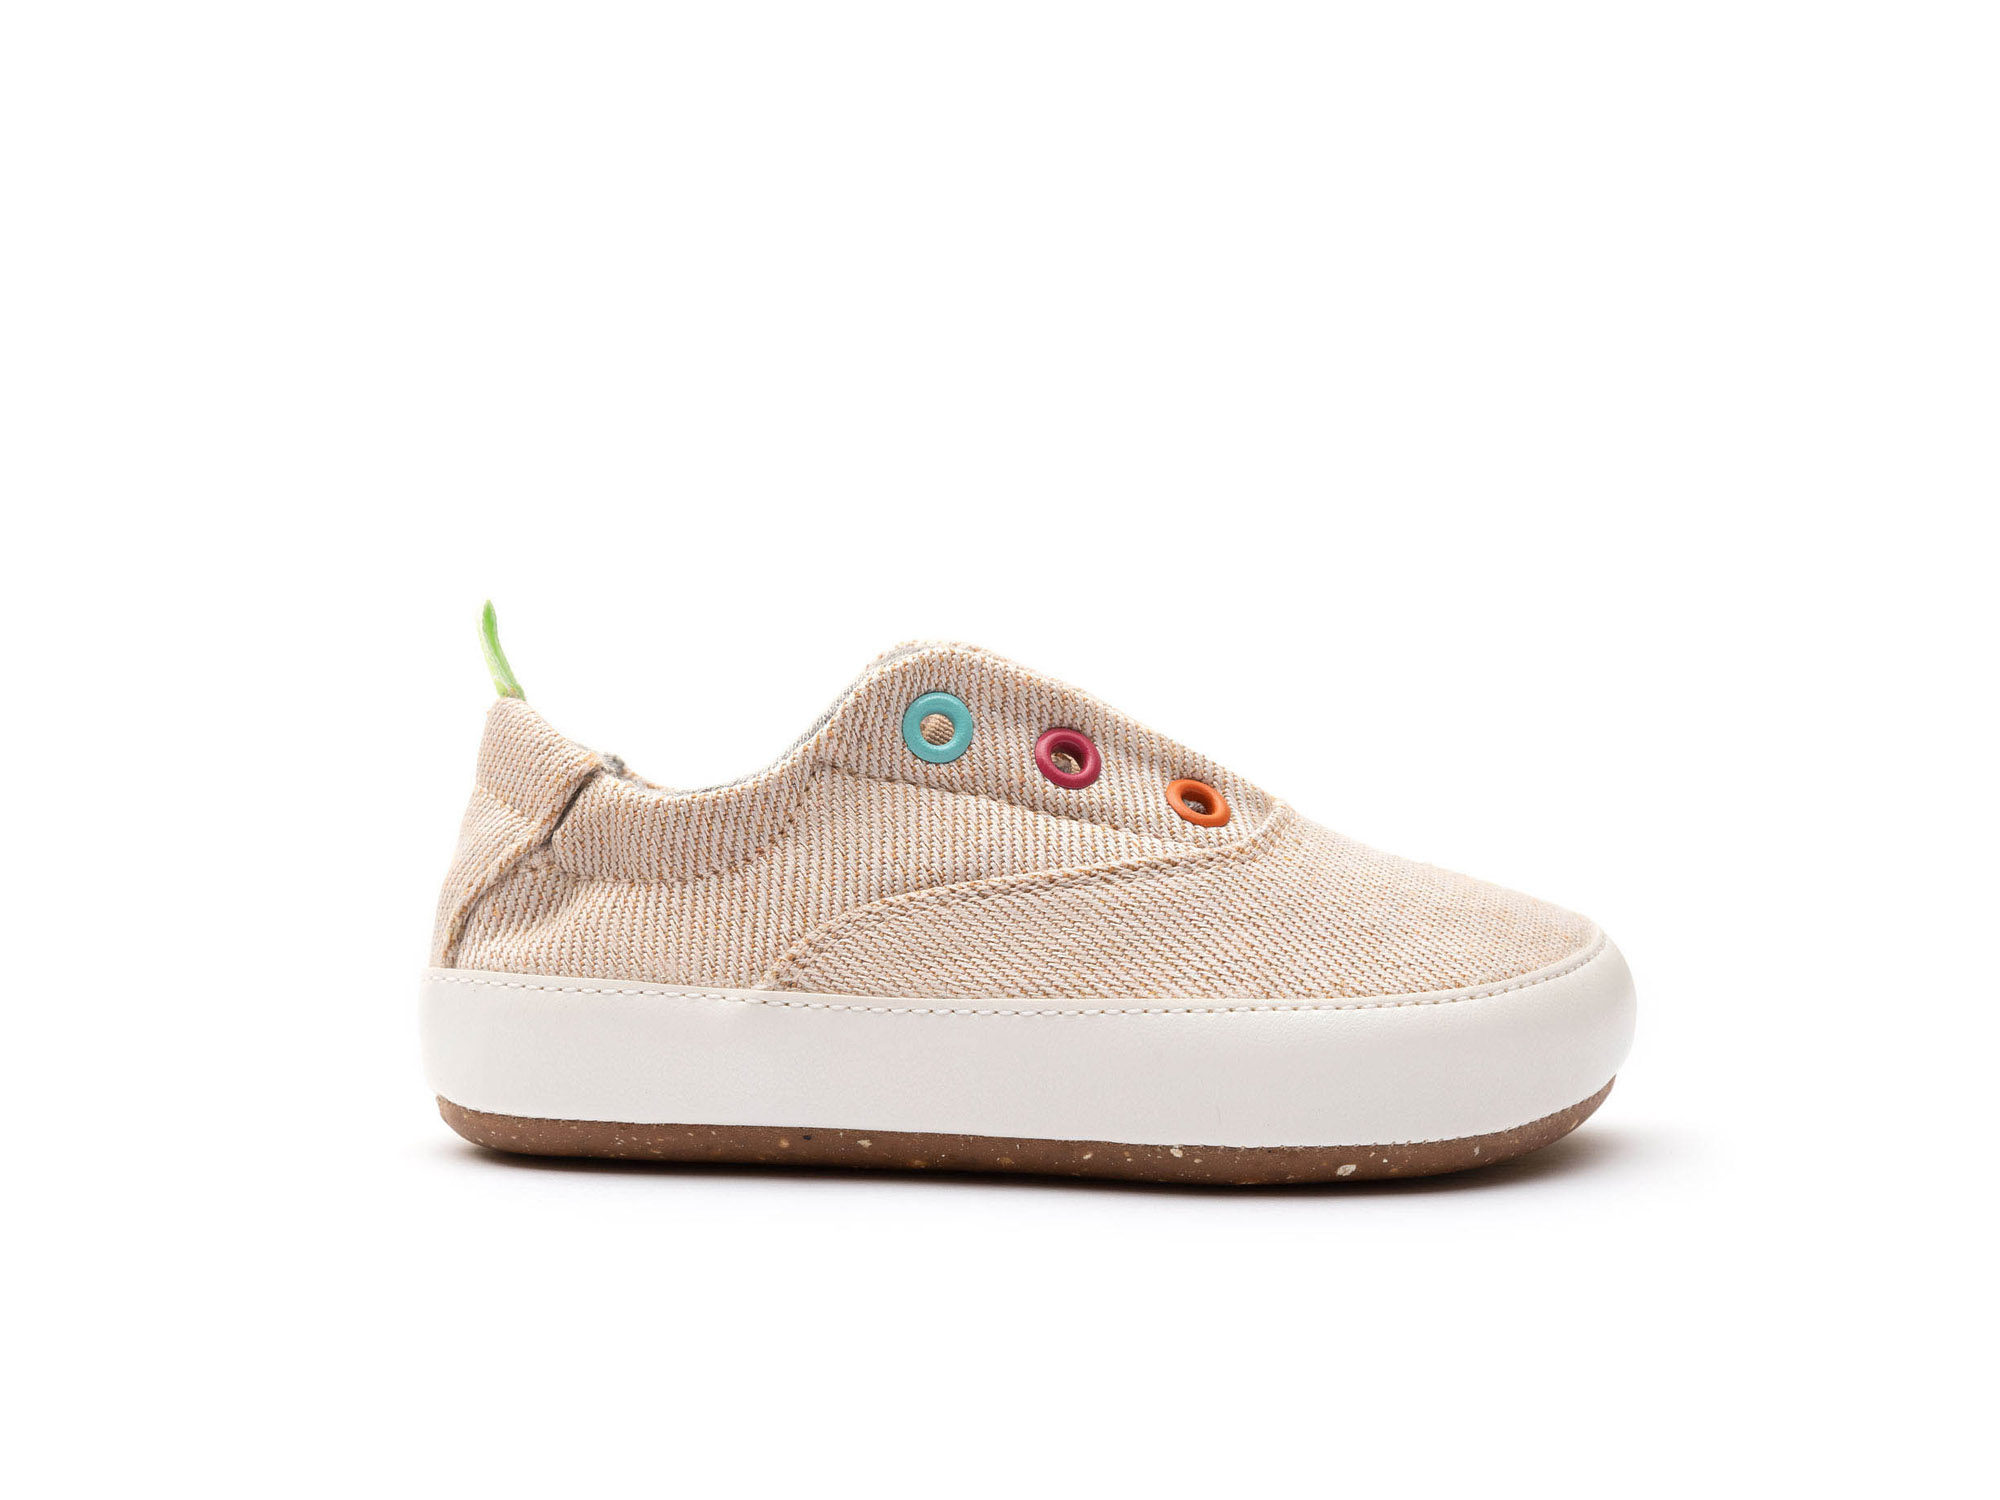 UP & GO Sneakers for Girls Spicey Green | Tip Toey Joey - Australia - 1